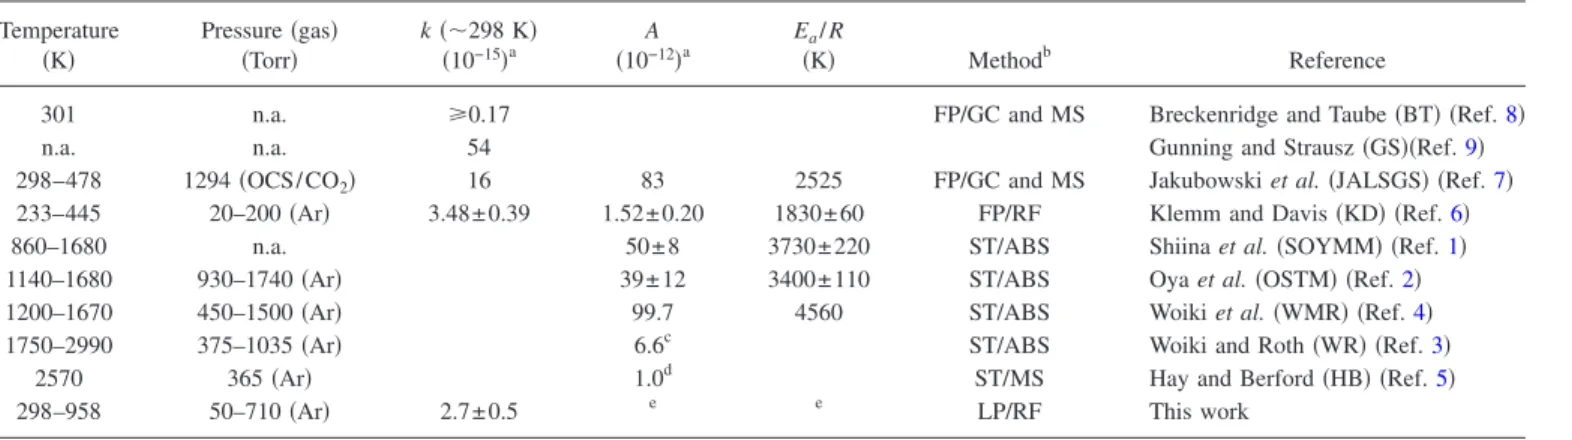 TABLE I. Summary of reported experimental rate coefficients using various methods.